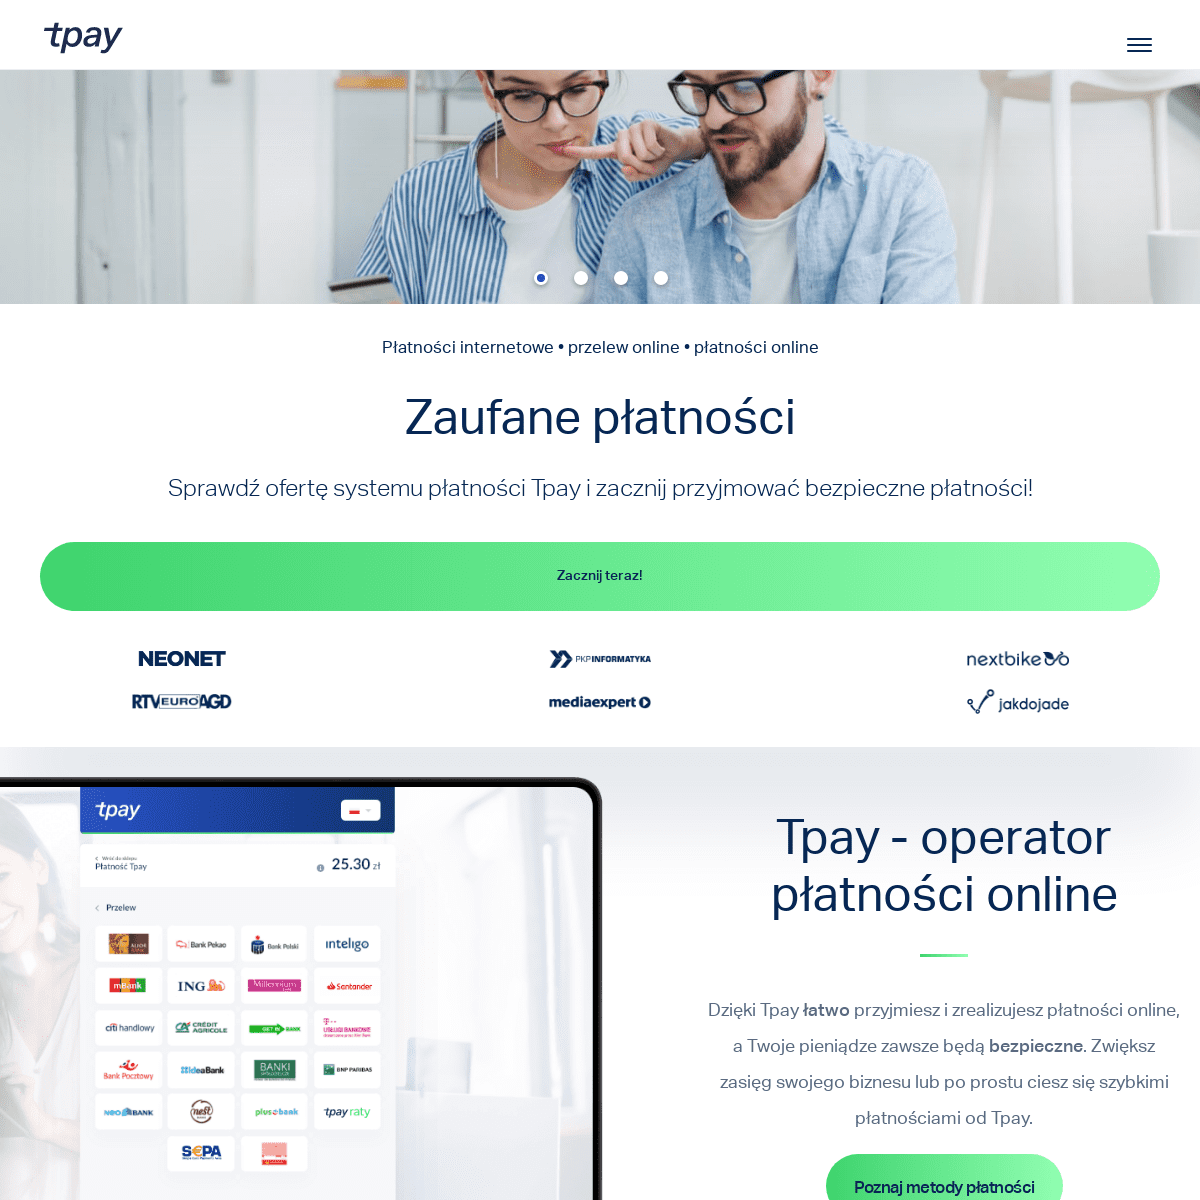 A complete backup of https://tpay.com